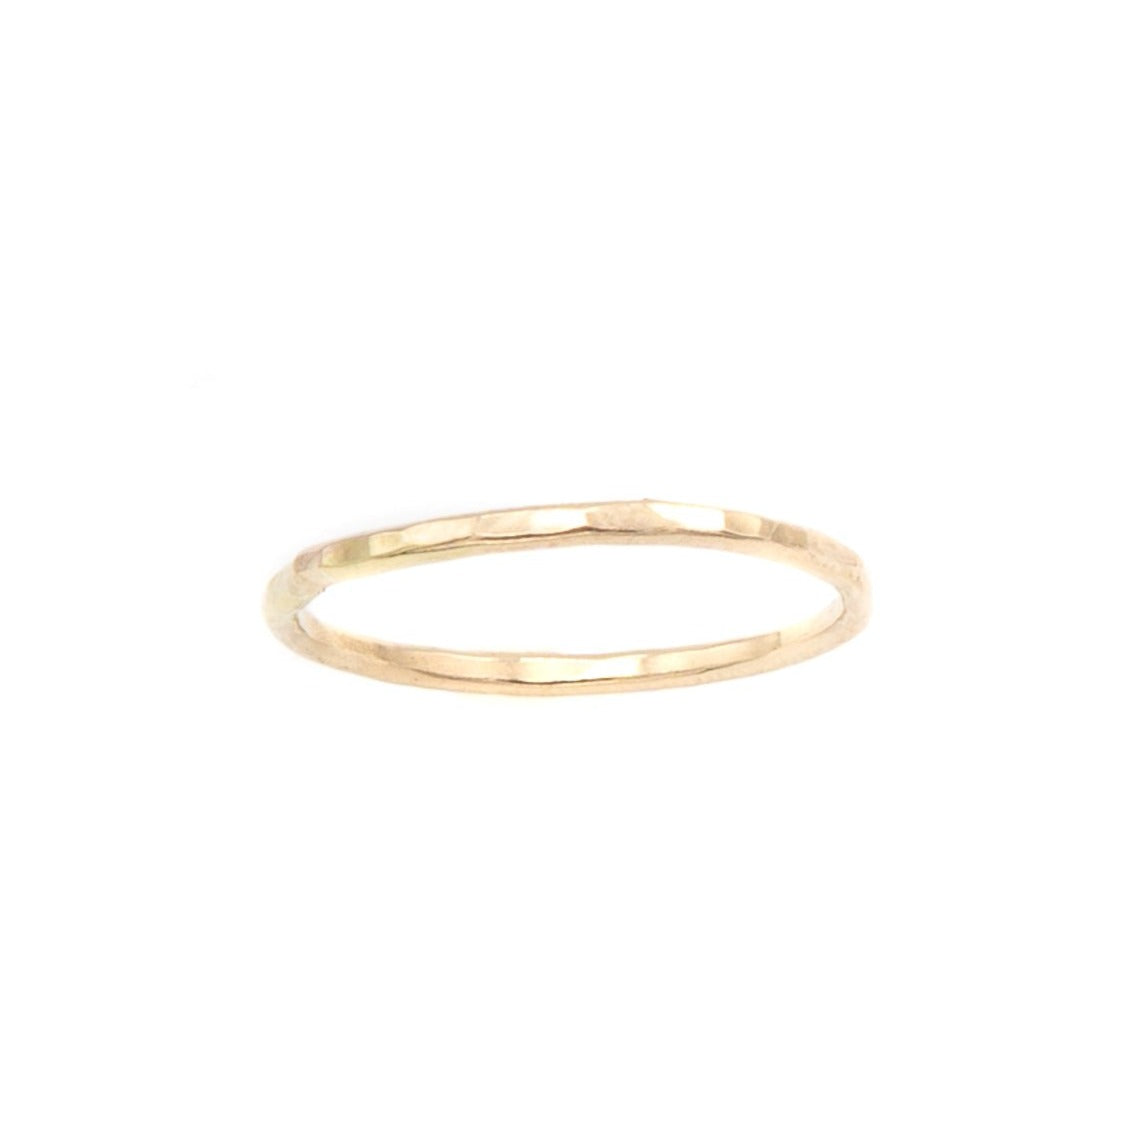 Chic Stackable Ring, 14k Gold Fill